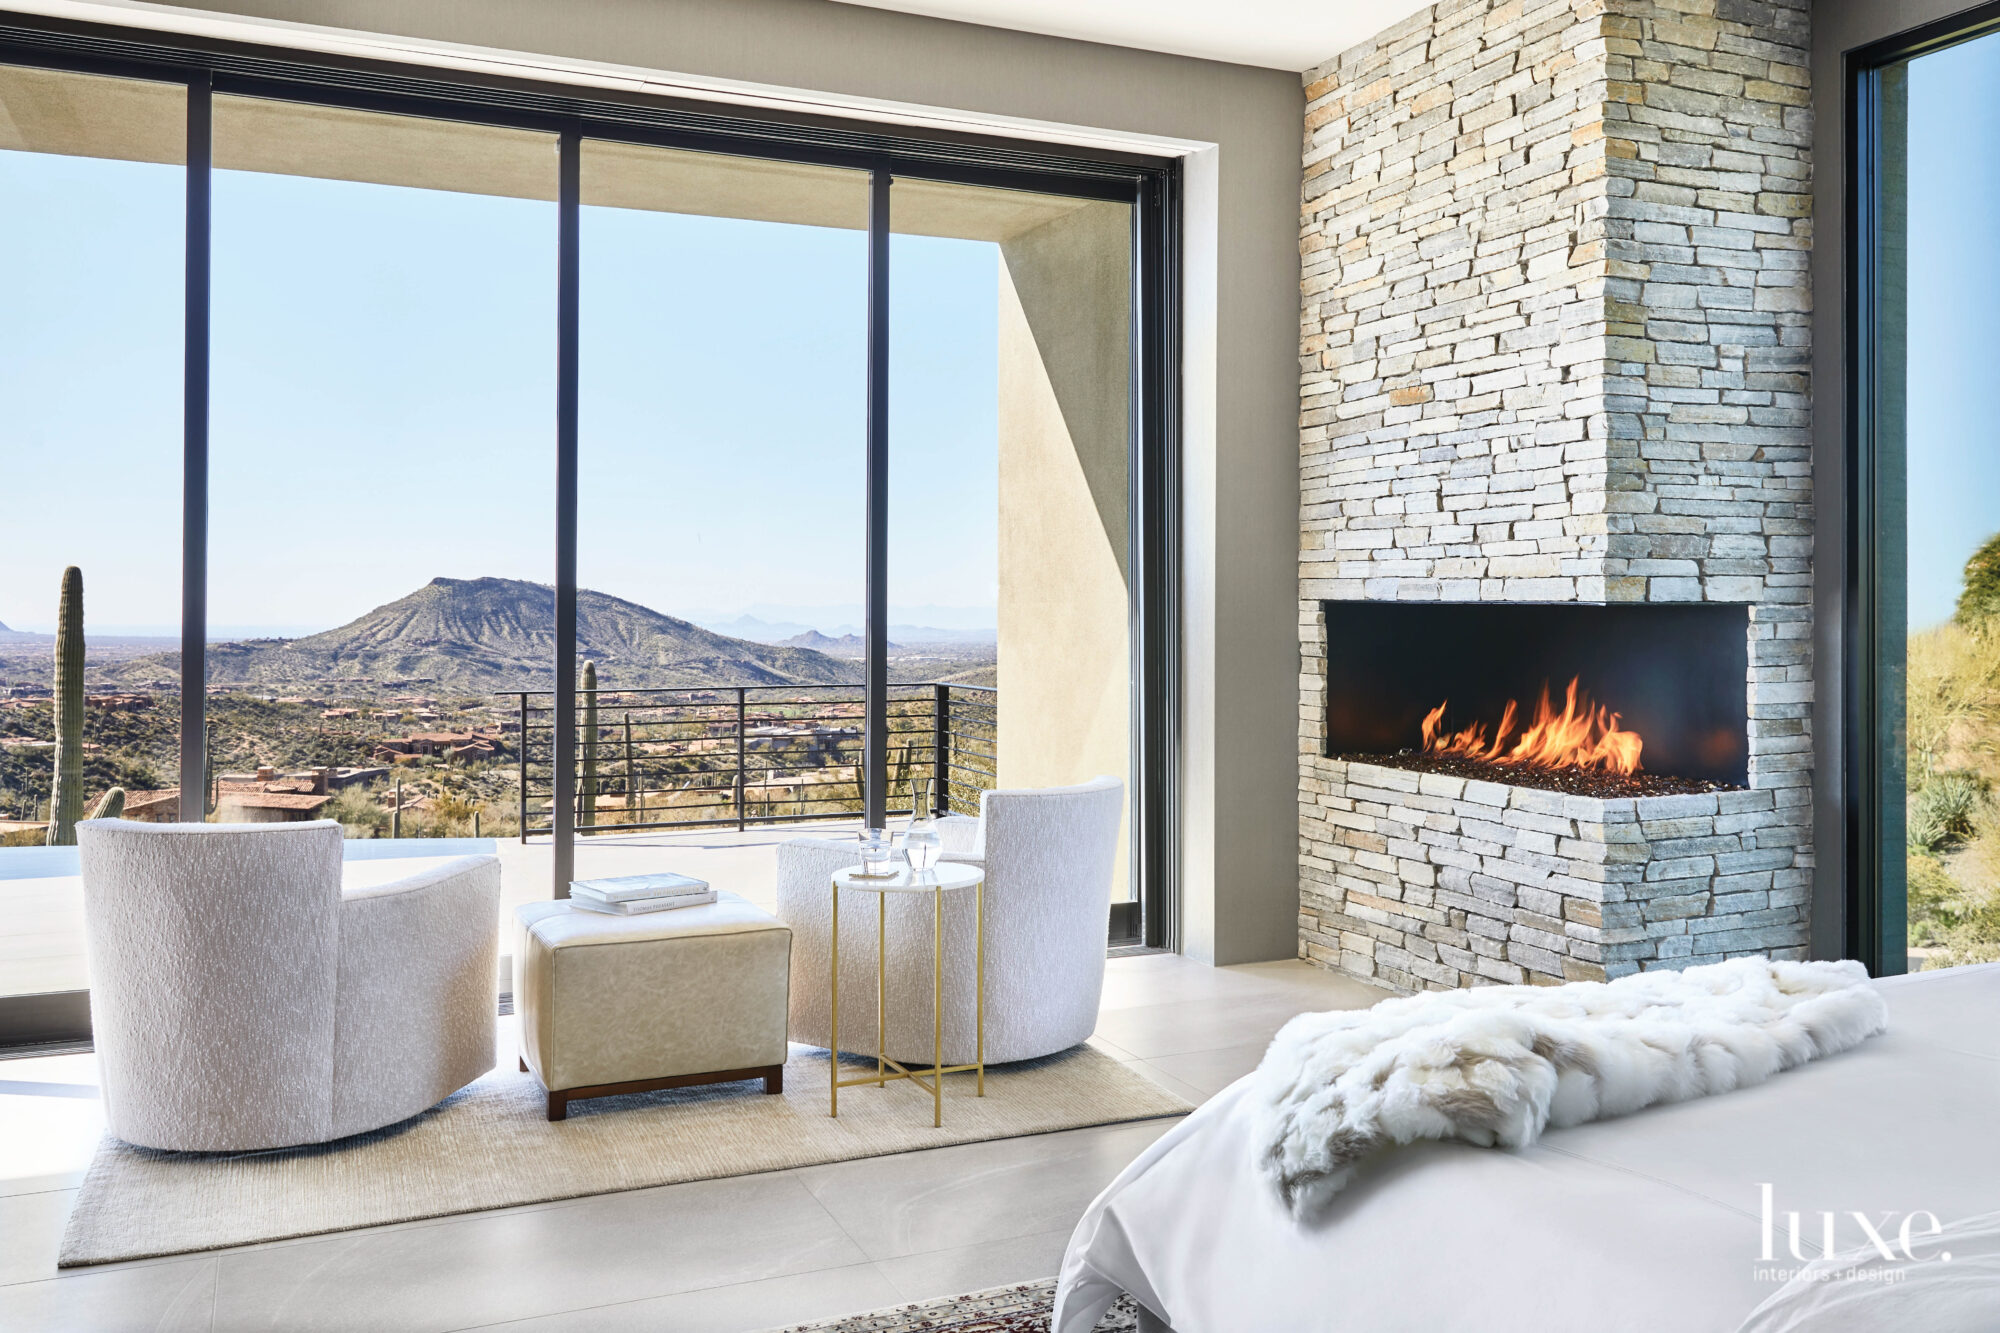 The master bedroom has a corner fireplace and a seating area overlooking the mountains.